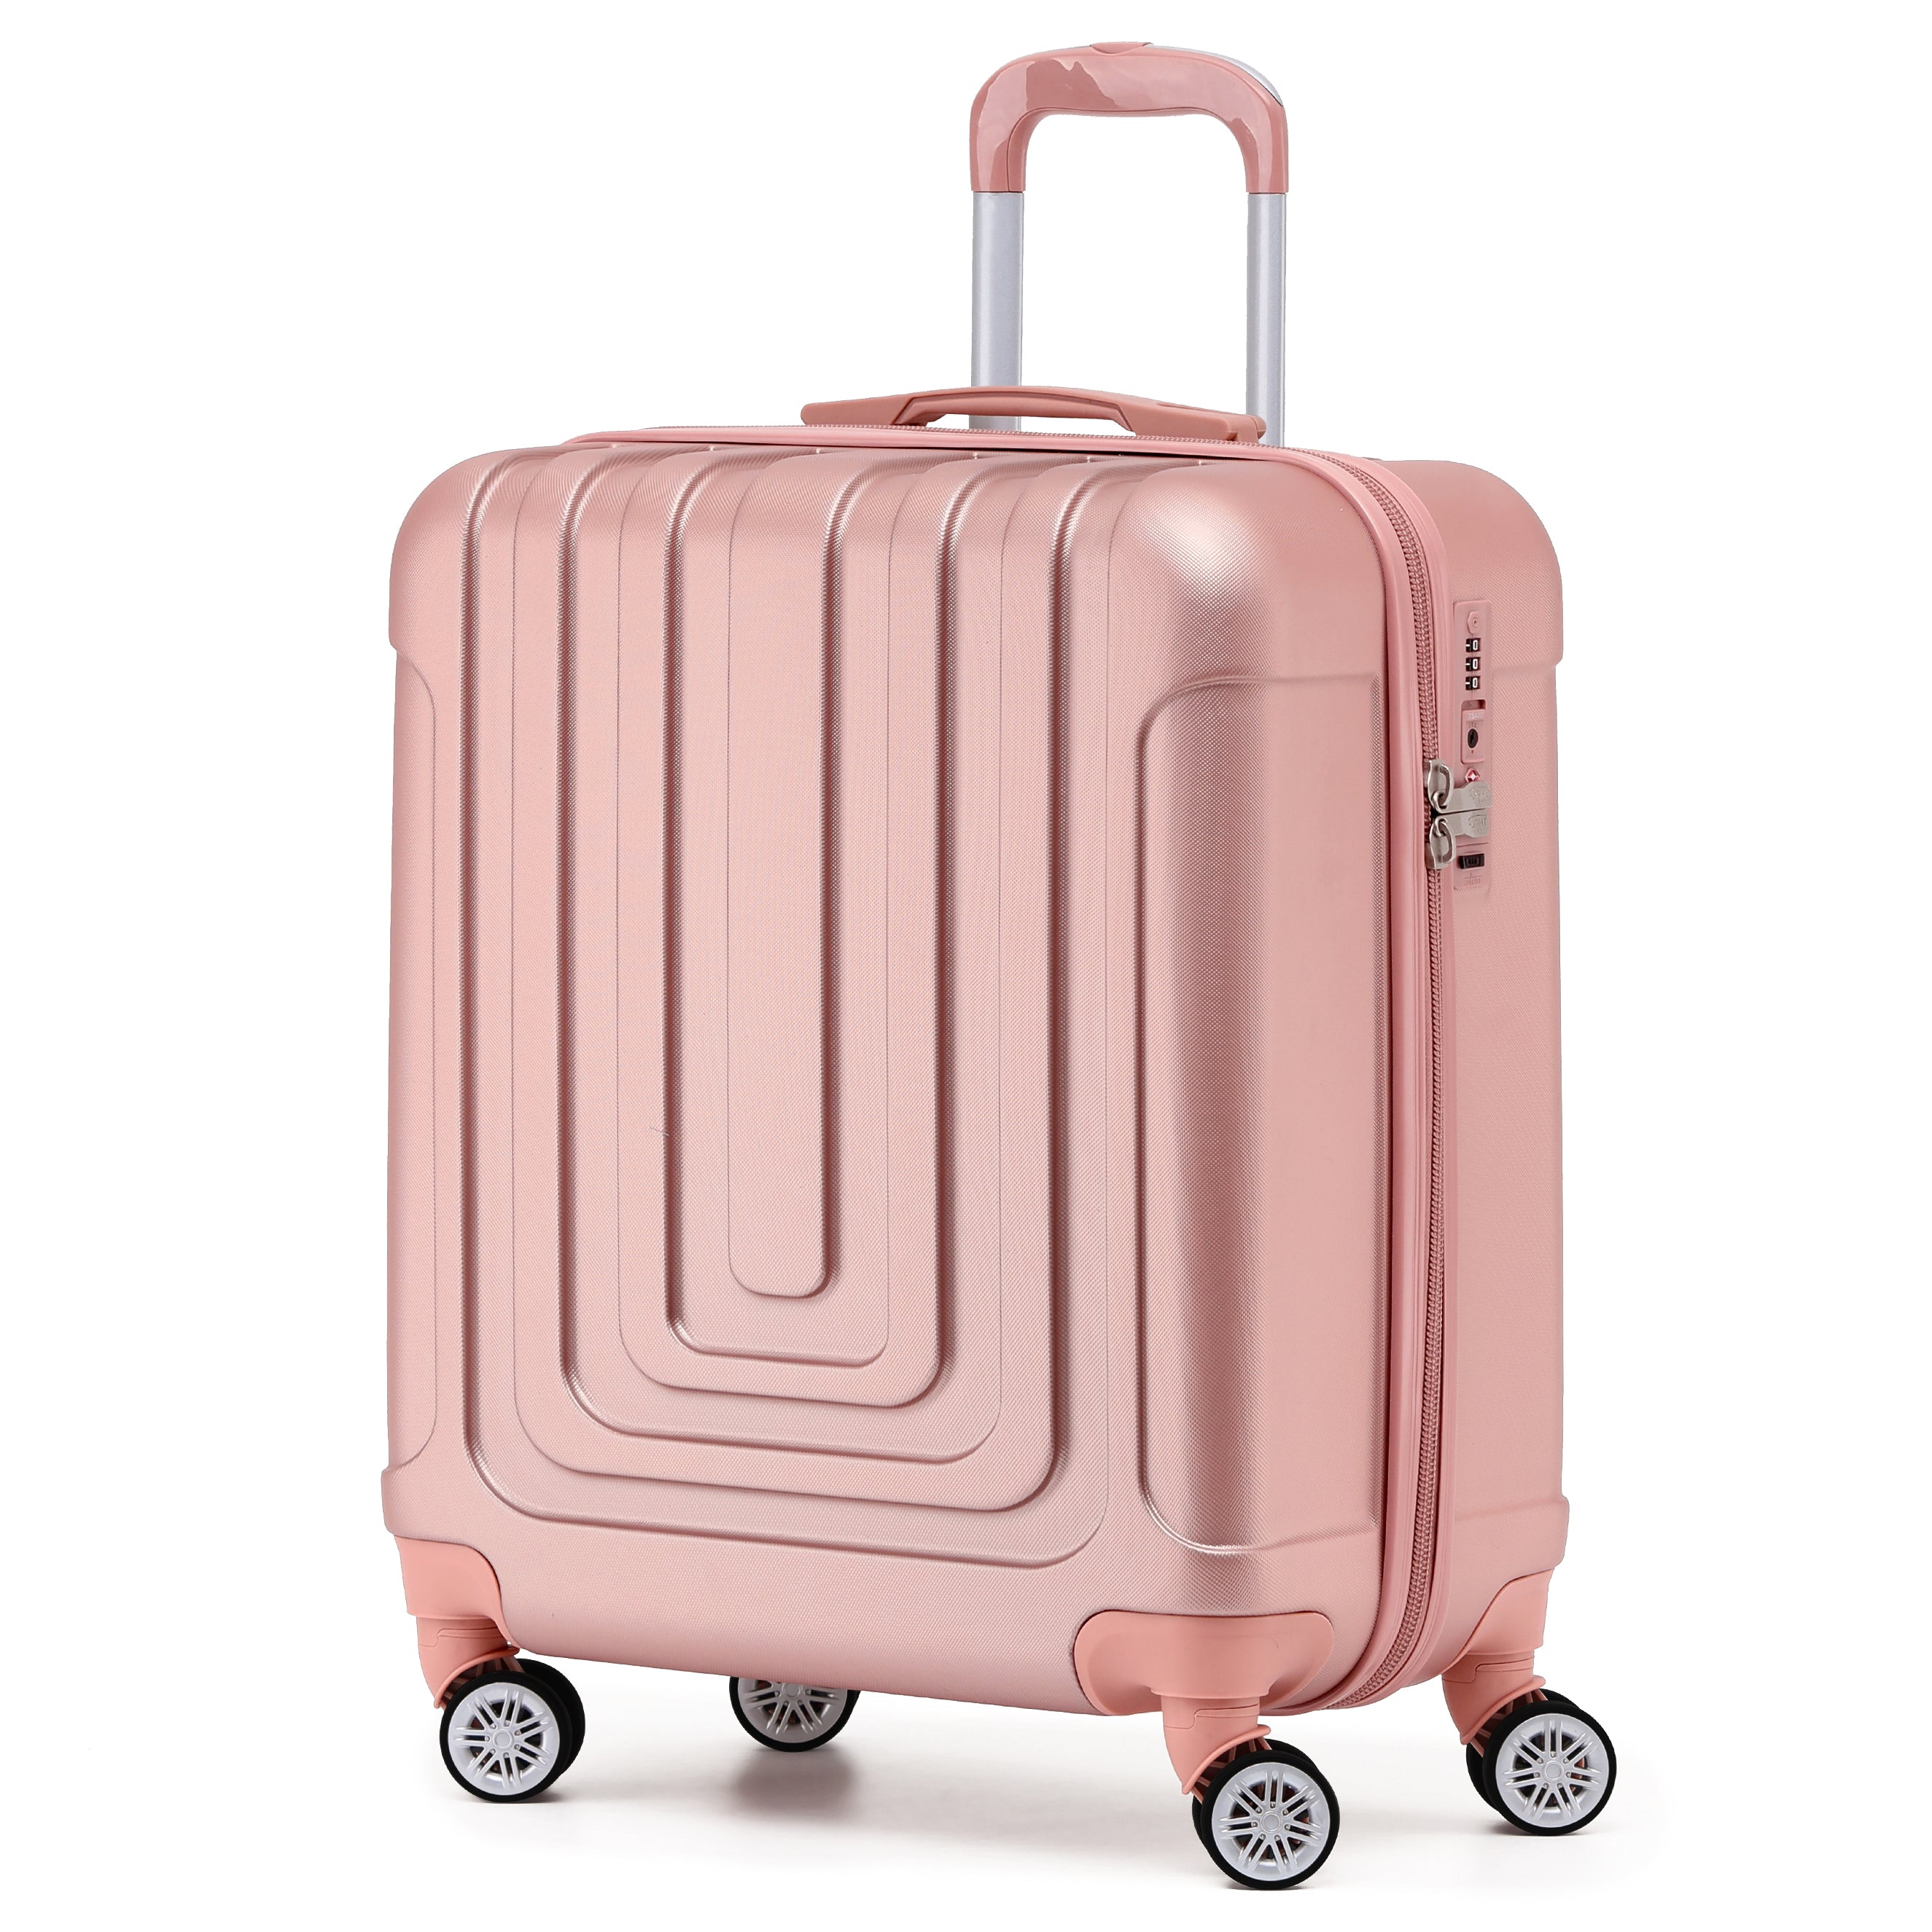 56x45x25cm Premium Hard Shell Lightweight Cabin Suitcase - 8 Spinner Wheels - Built-in TSA Lock & USB Port - Approved for easyJet Large Cabin Carry on